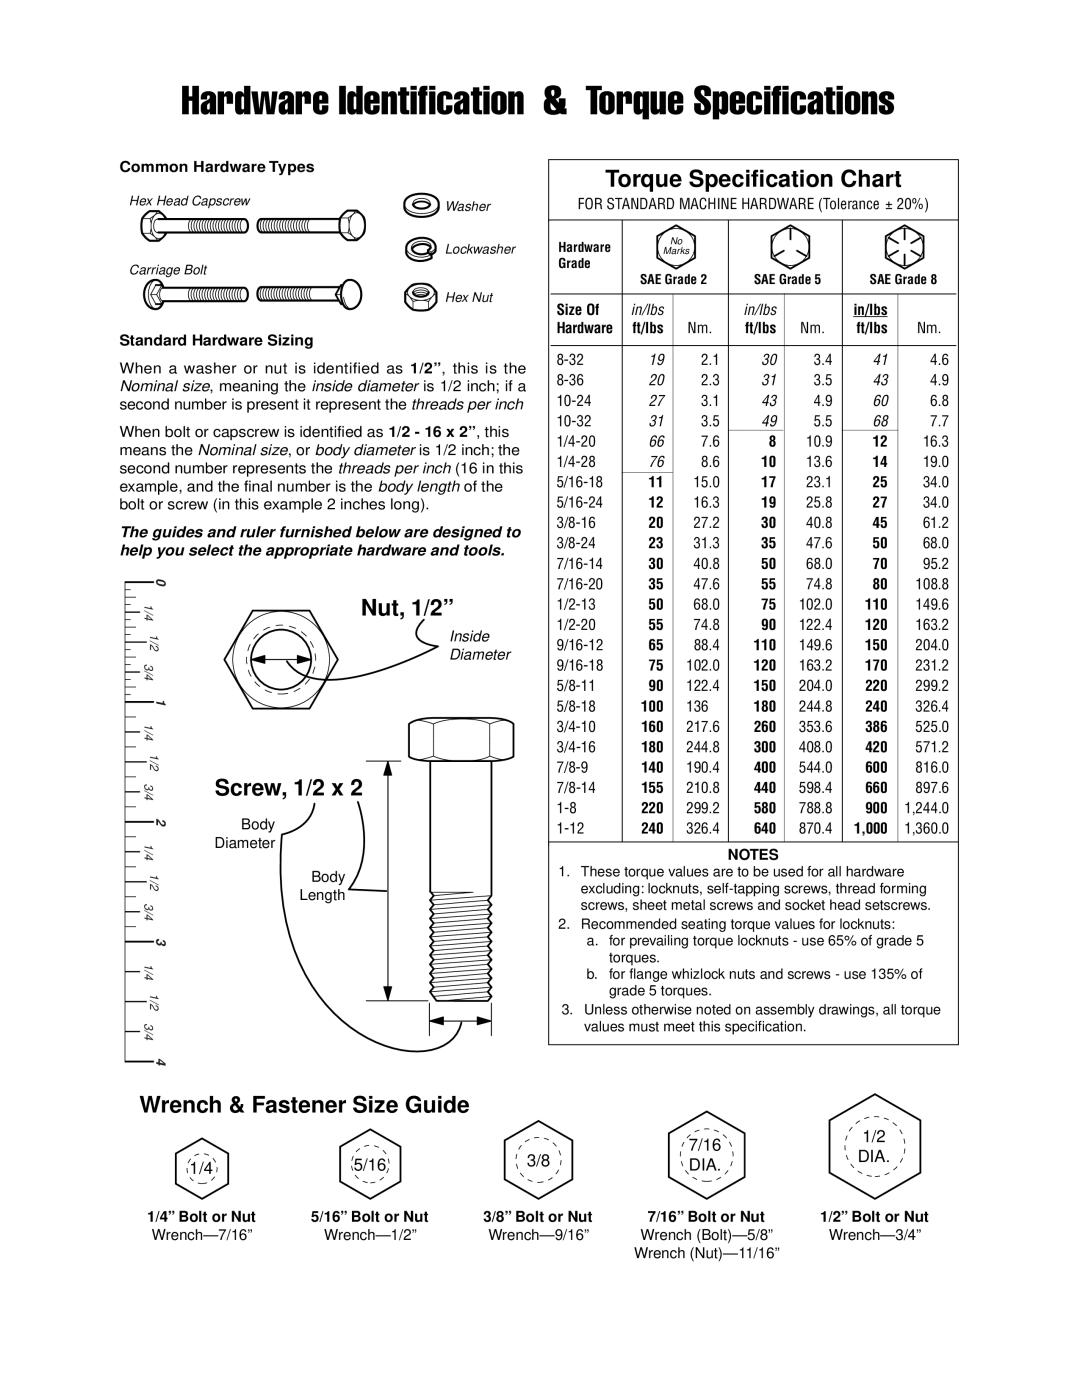 Simplicity Regent / 2500 Wrench & Fastener Size Guide, Hardware Identification & Torque Specifications, Nut, 1/2”, 7/16 